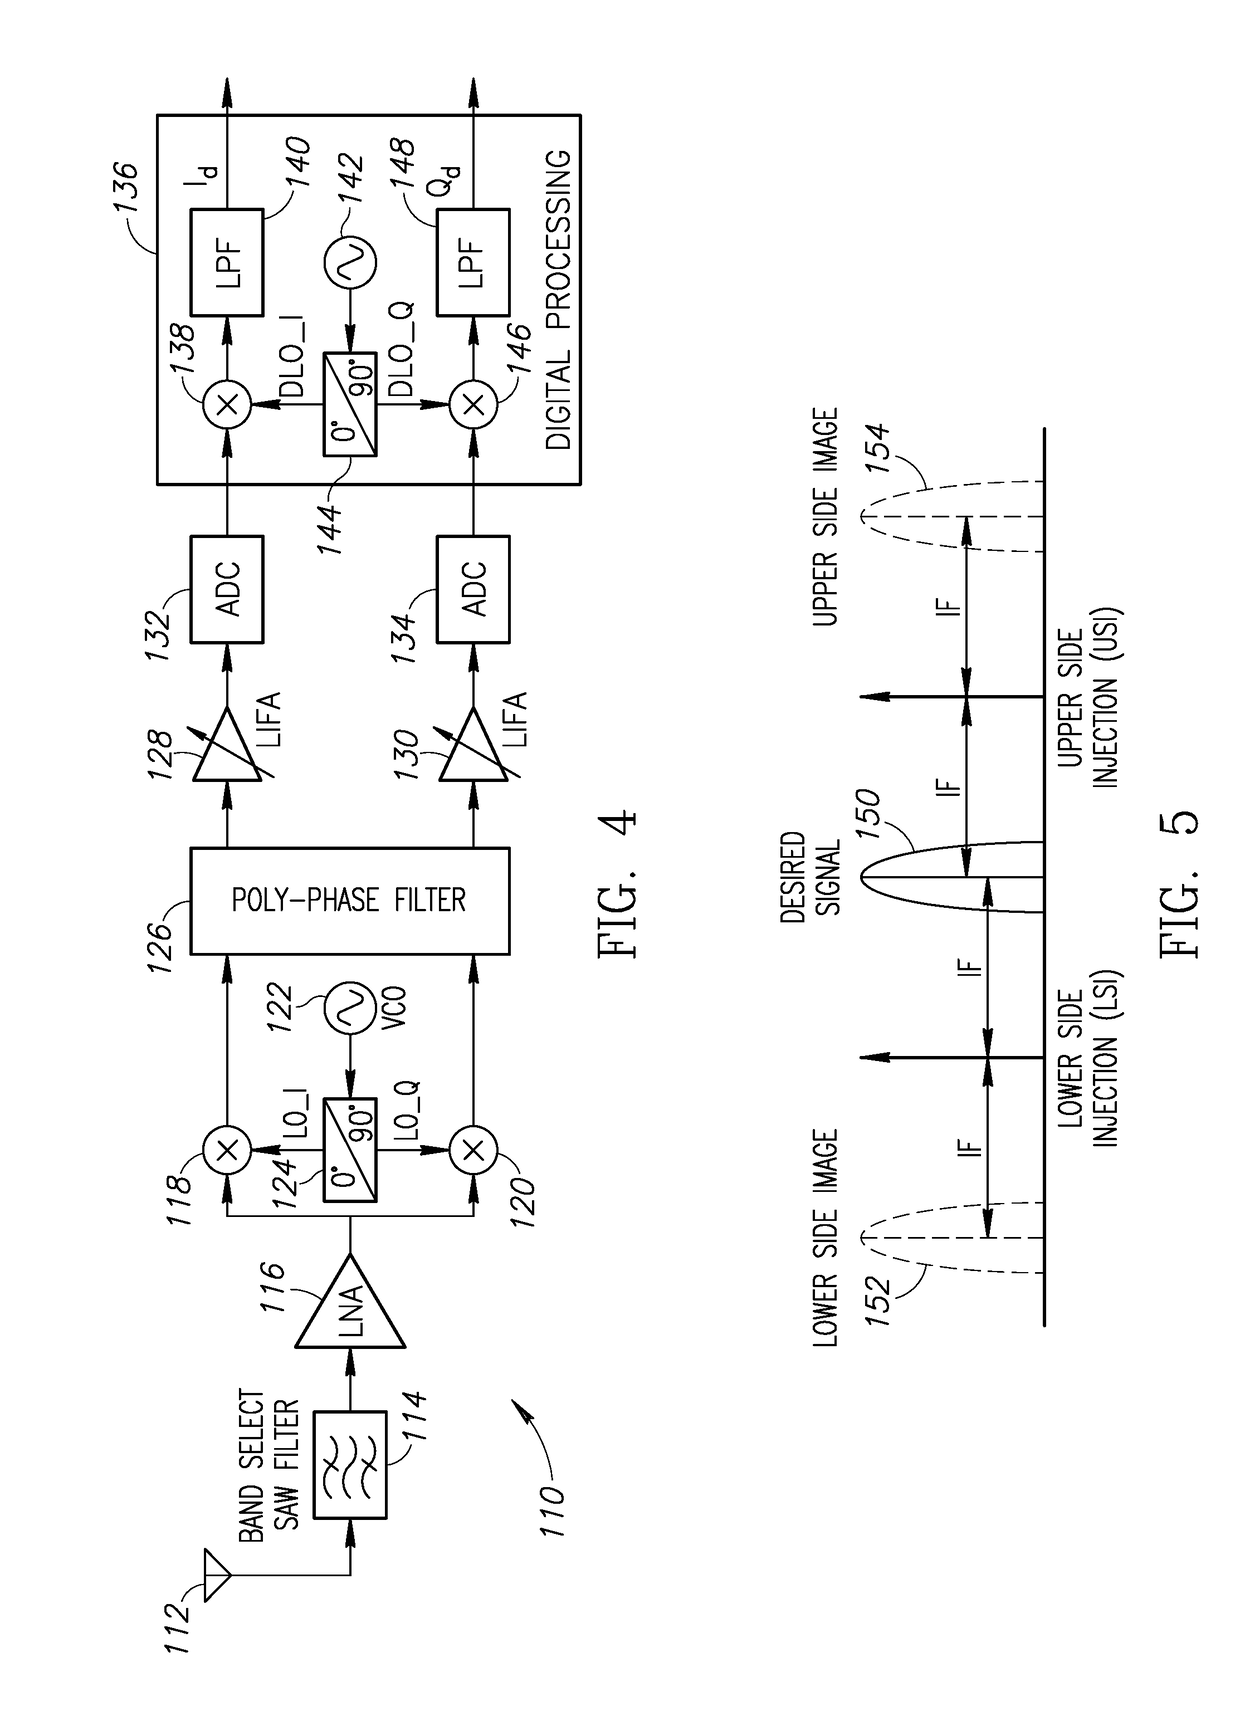 Apparatus and method of reducing power consumption in a low intermediate frequency radio receiver